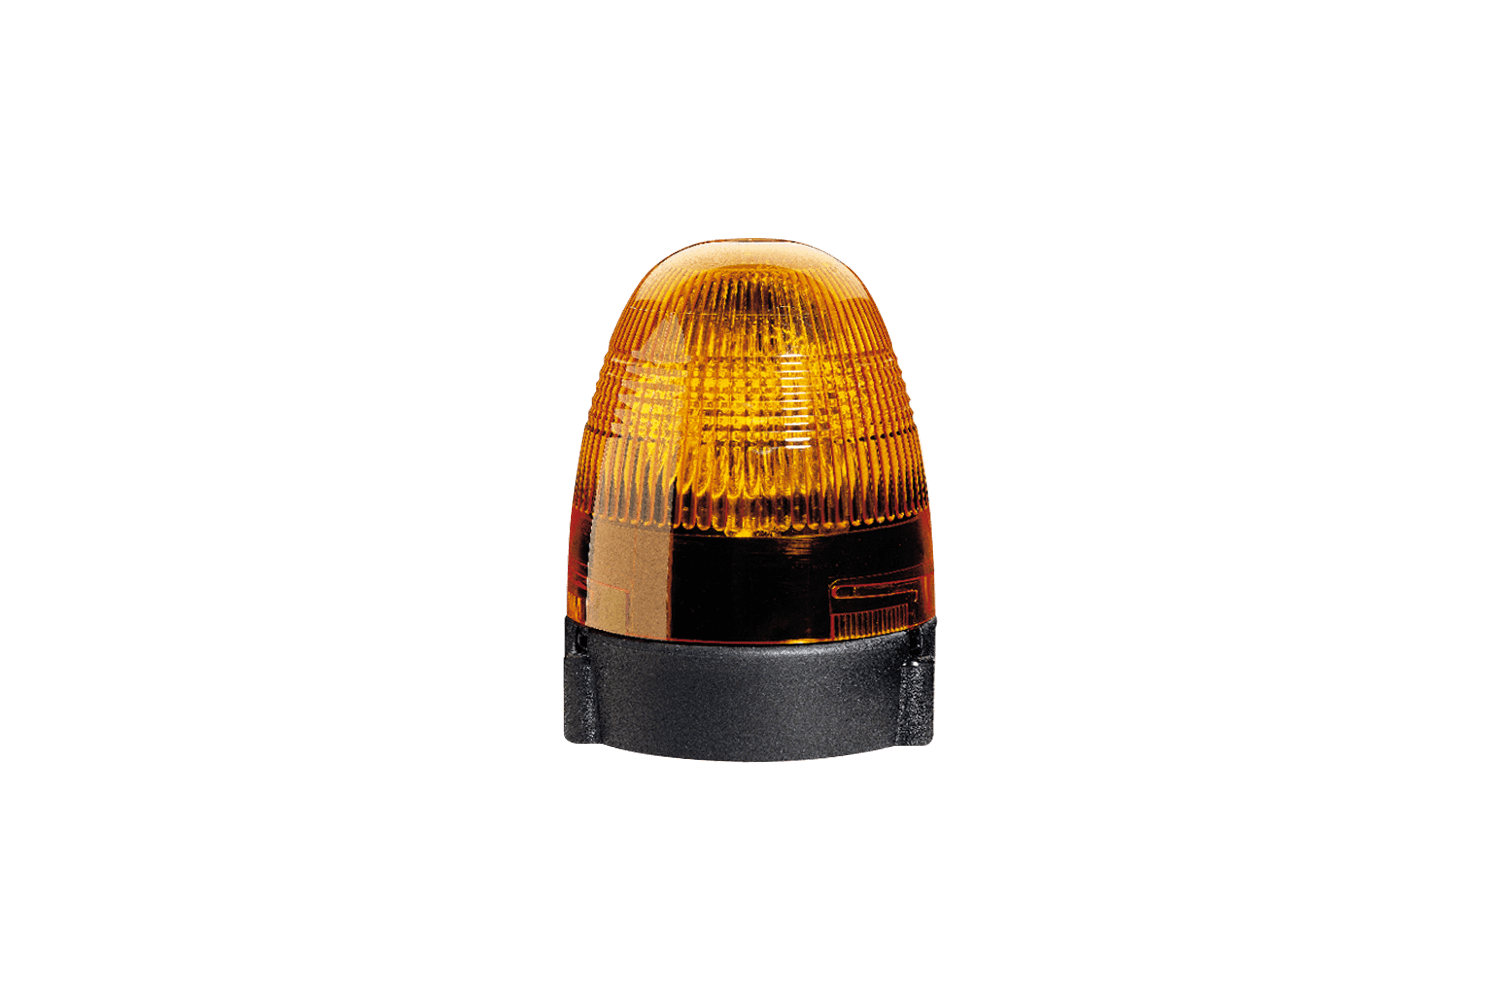 KL Rotaflex/KL Rotafix warning lamp from Hella offered by Patlon